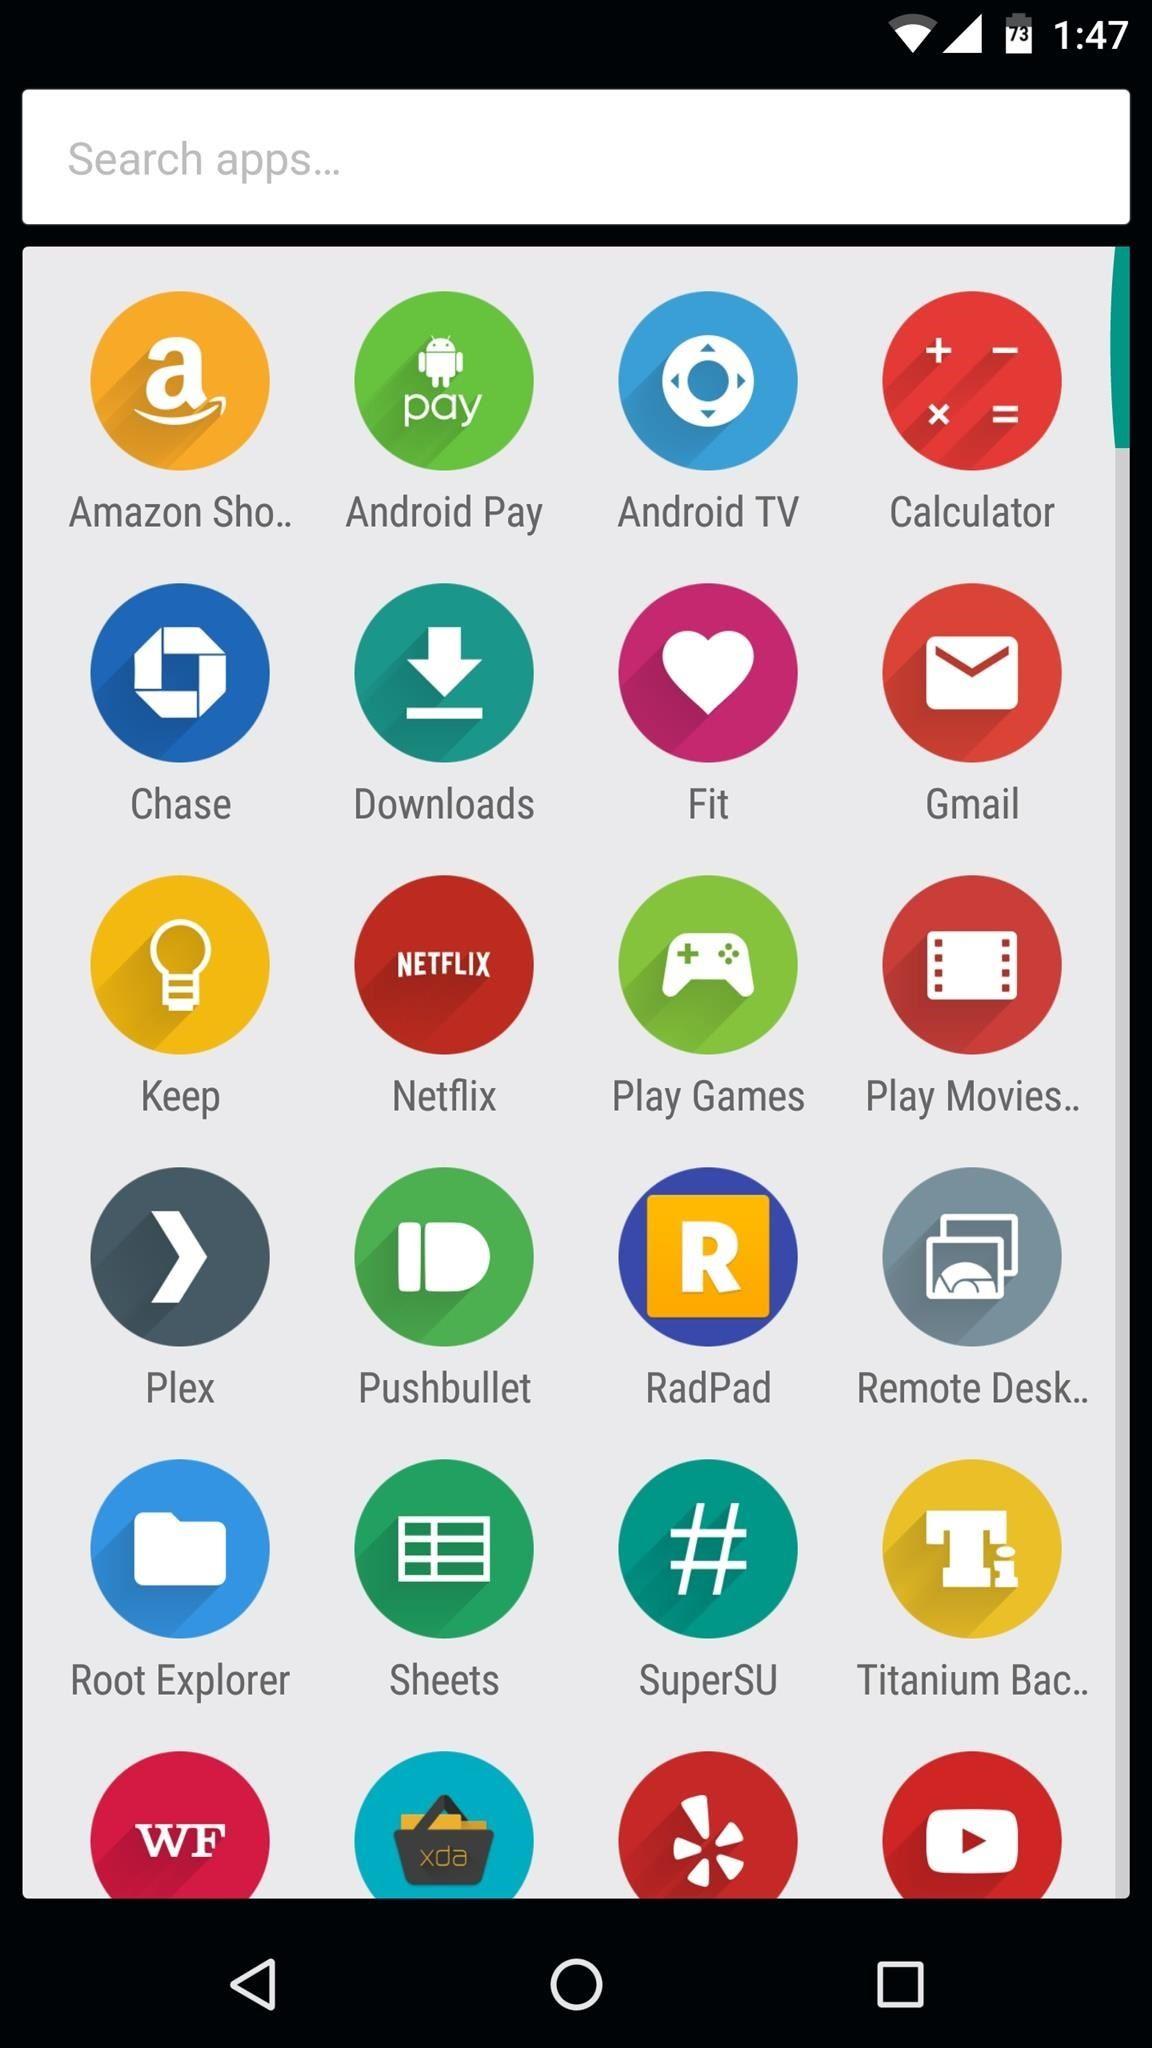 General Mobile App Logo - 10 Free Icon Packs That'll Change the Look & Feel of Your Android ...